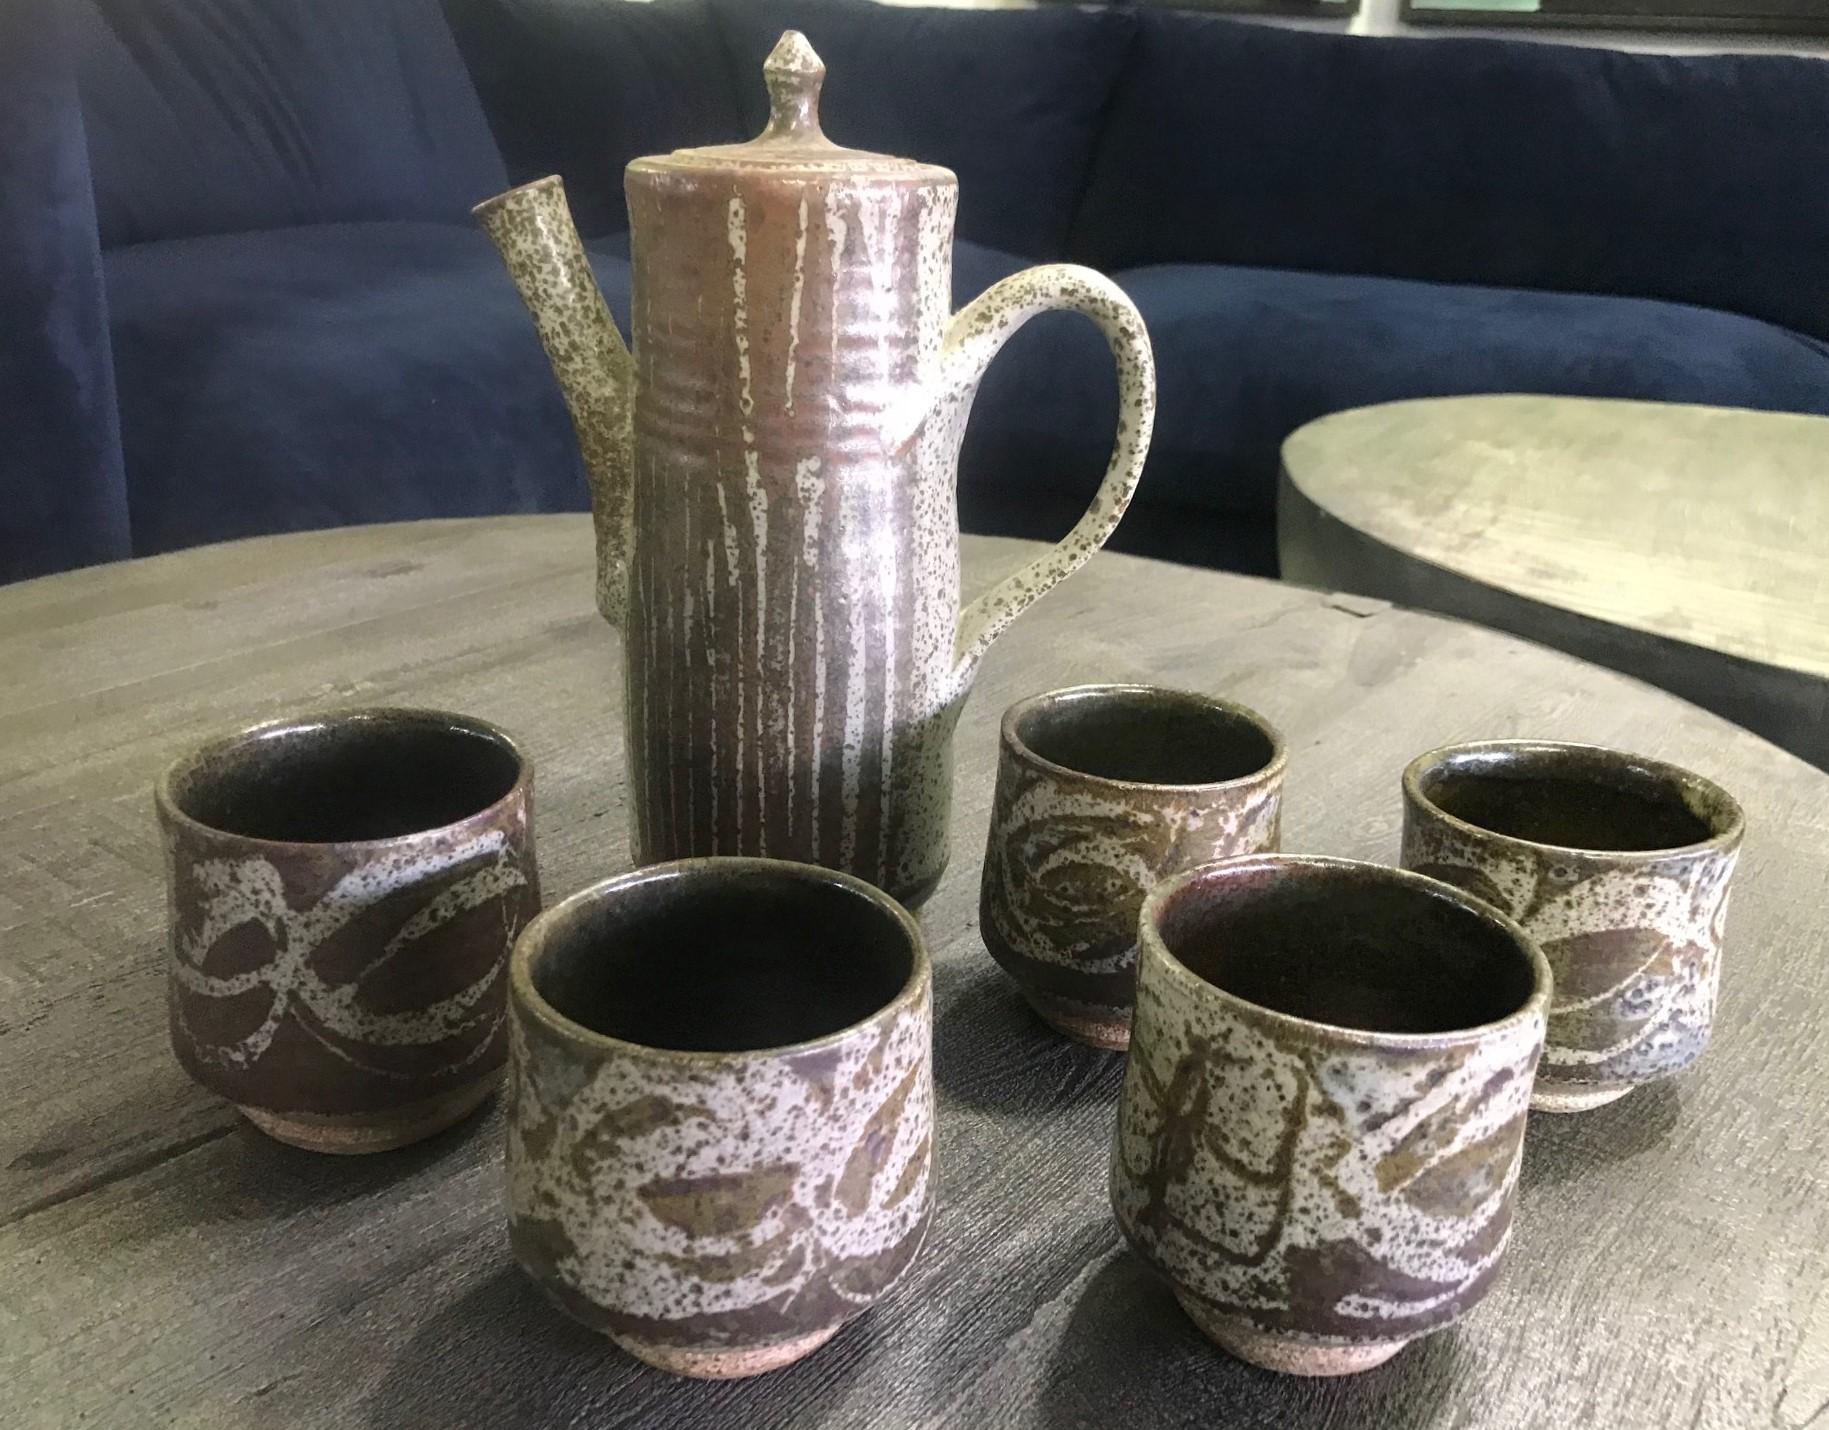 A fantastic, quite rare early tea/coffee set by American master potter Peter Voulkos who is known for his abstract Expressionist ceramic pottery pieces and sculptures. A very atypical piece. So finely thrown. The craftsmanship and design are